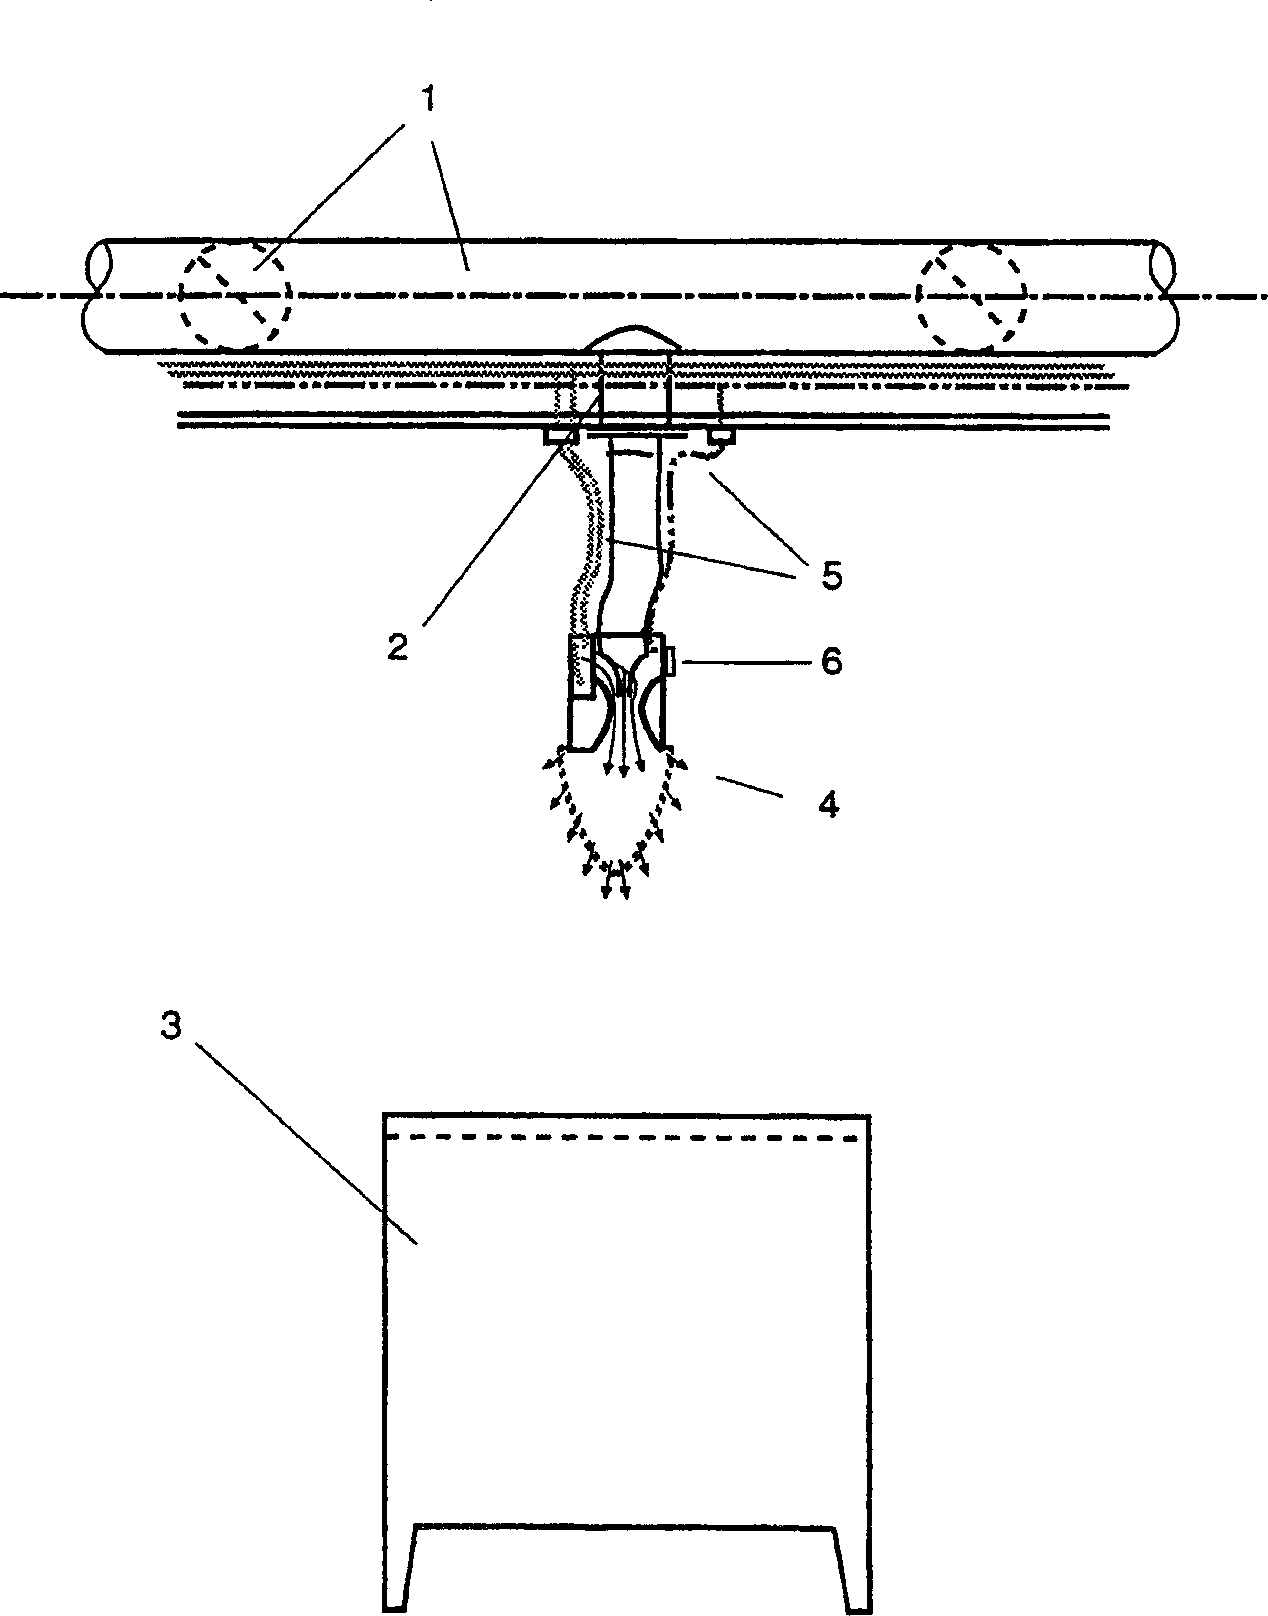 Method and means to create an individually controlled climite at a separate workstation in a room having a primary climite equipment